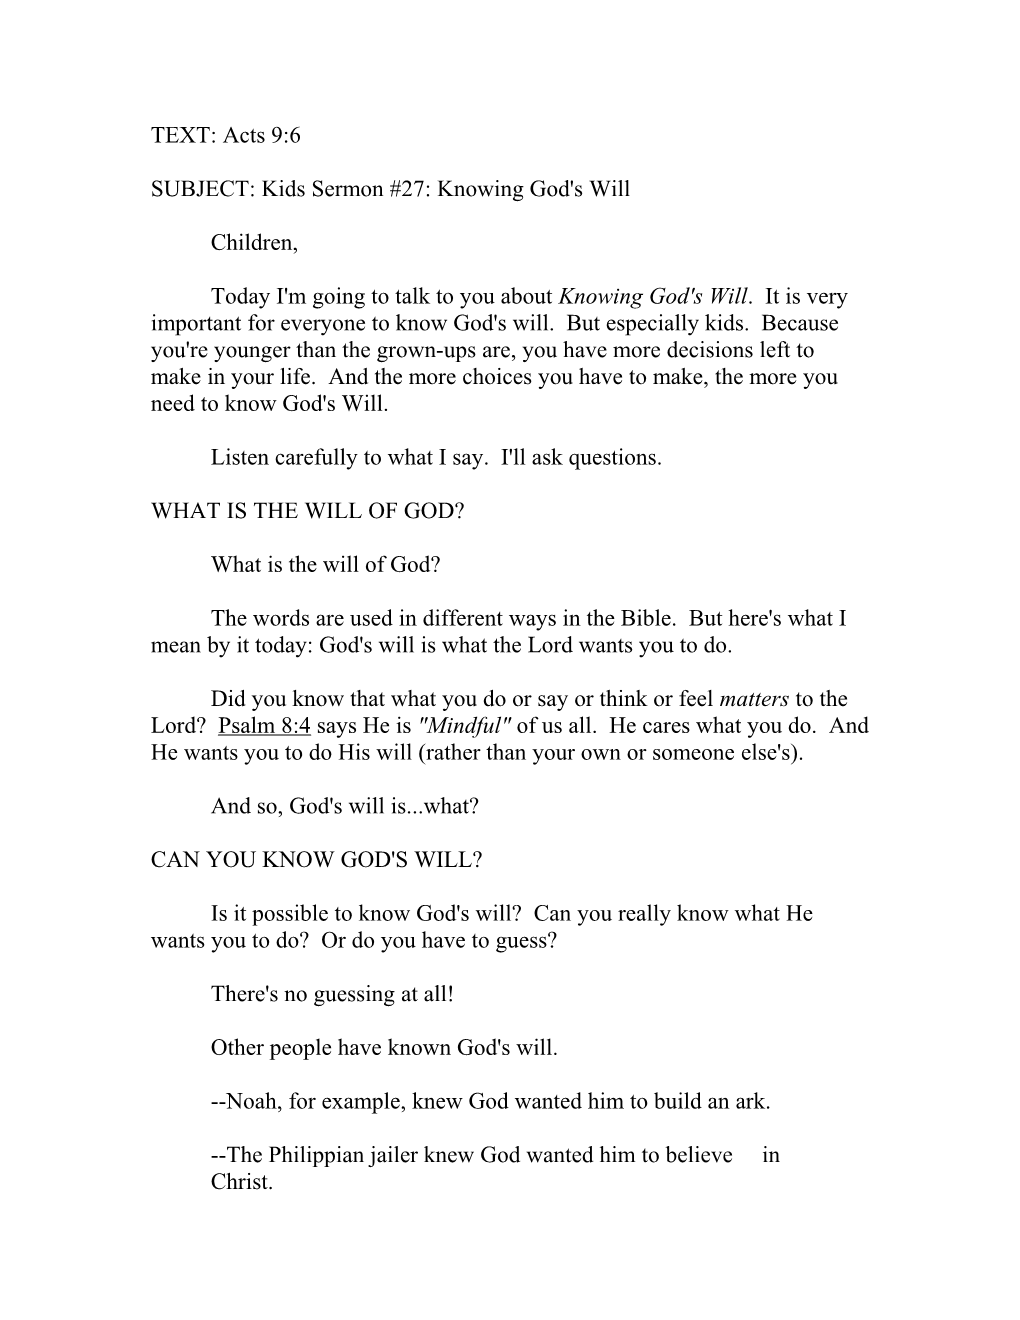 SUBJECT: Kids Sermon #27: Knowing God's Will